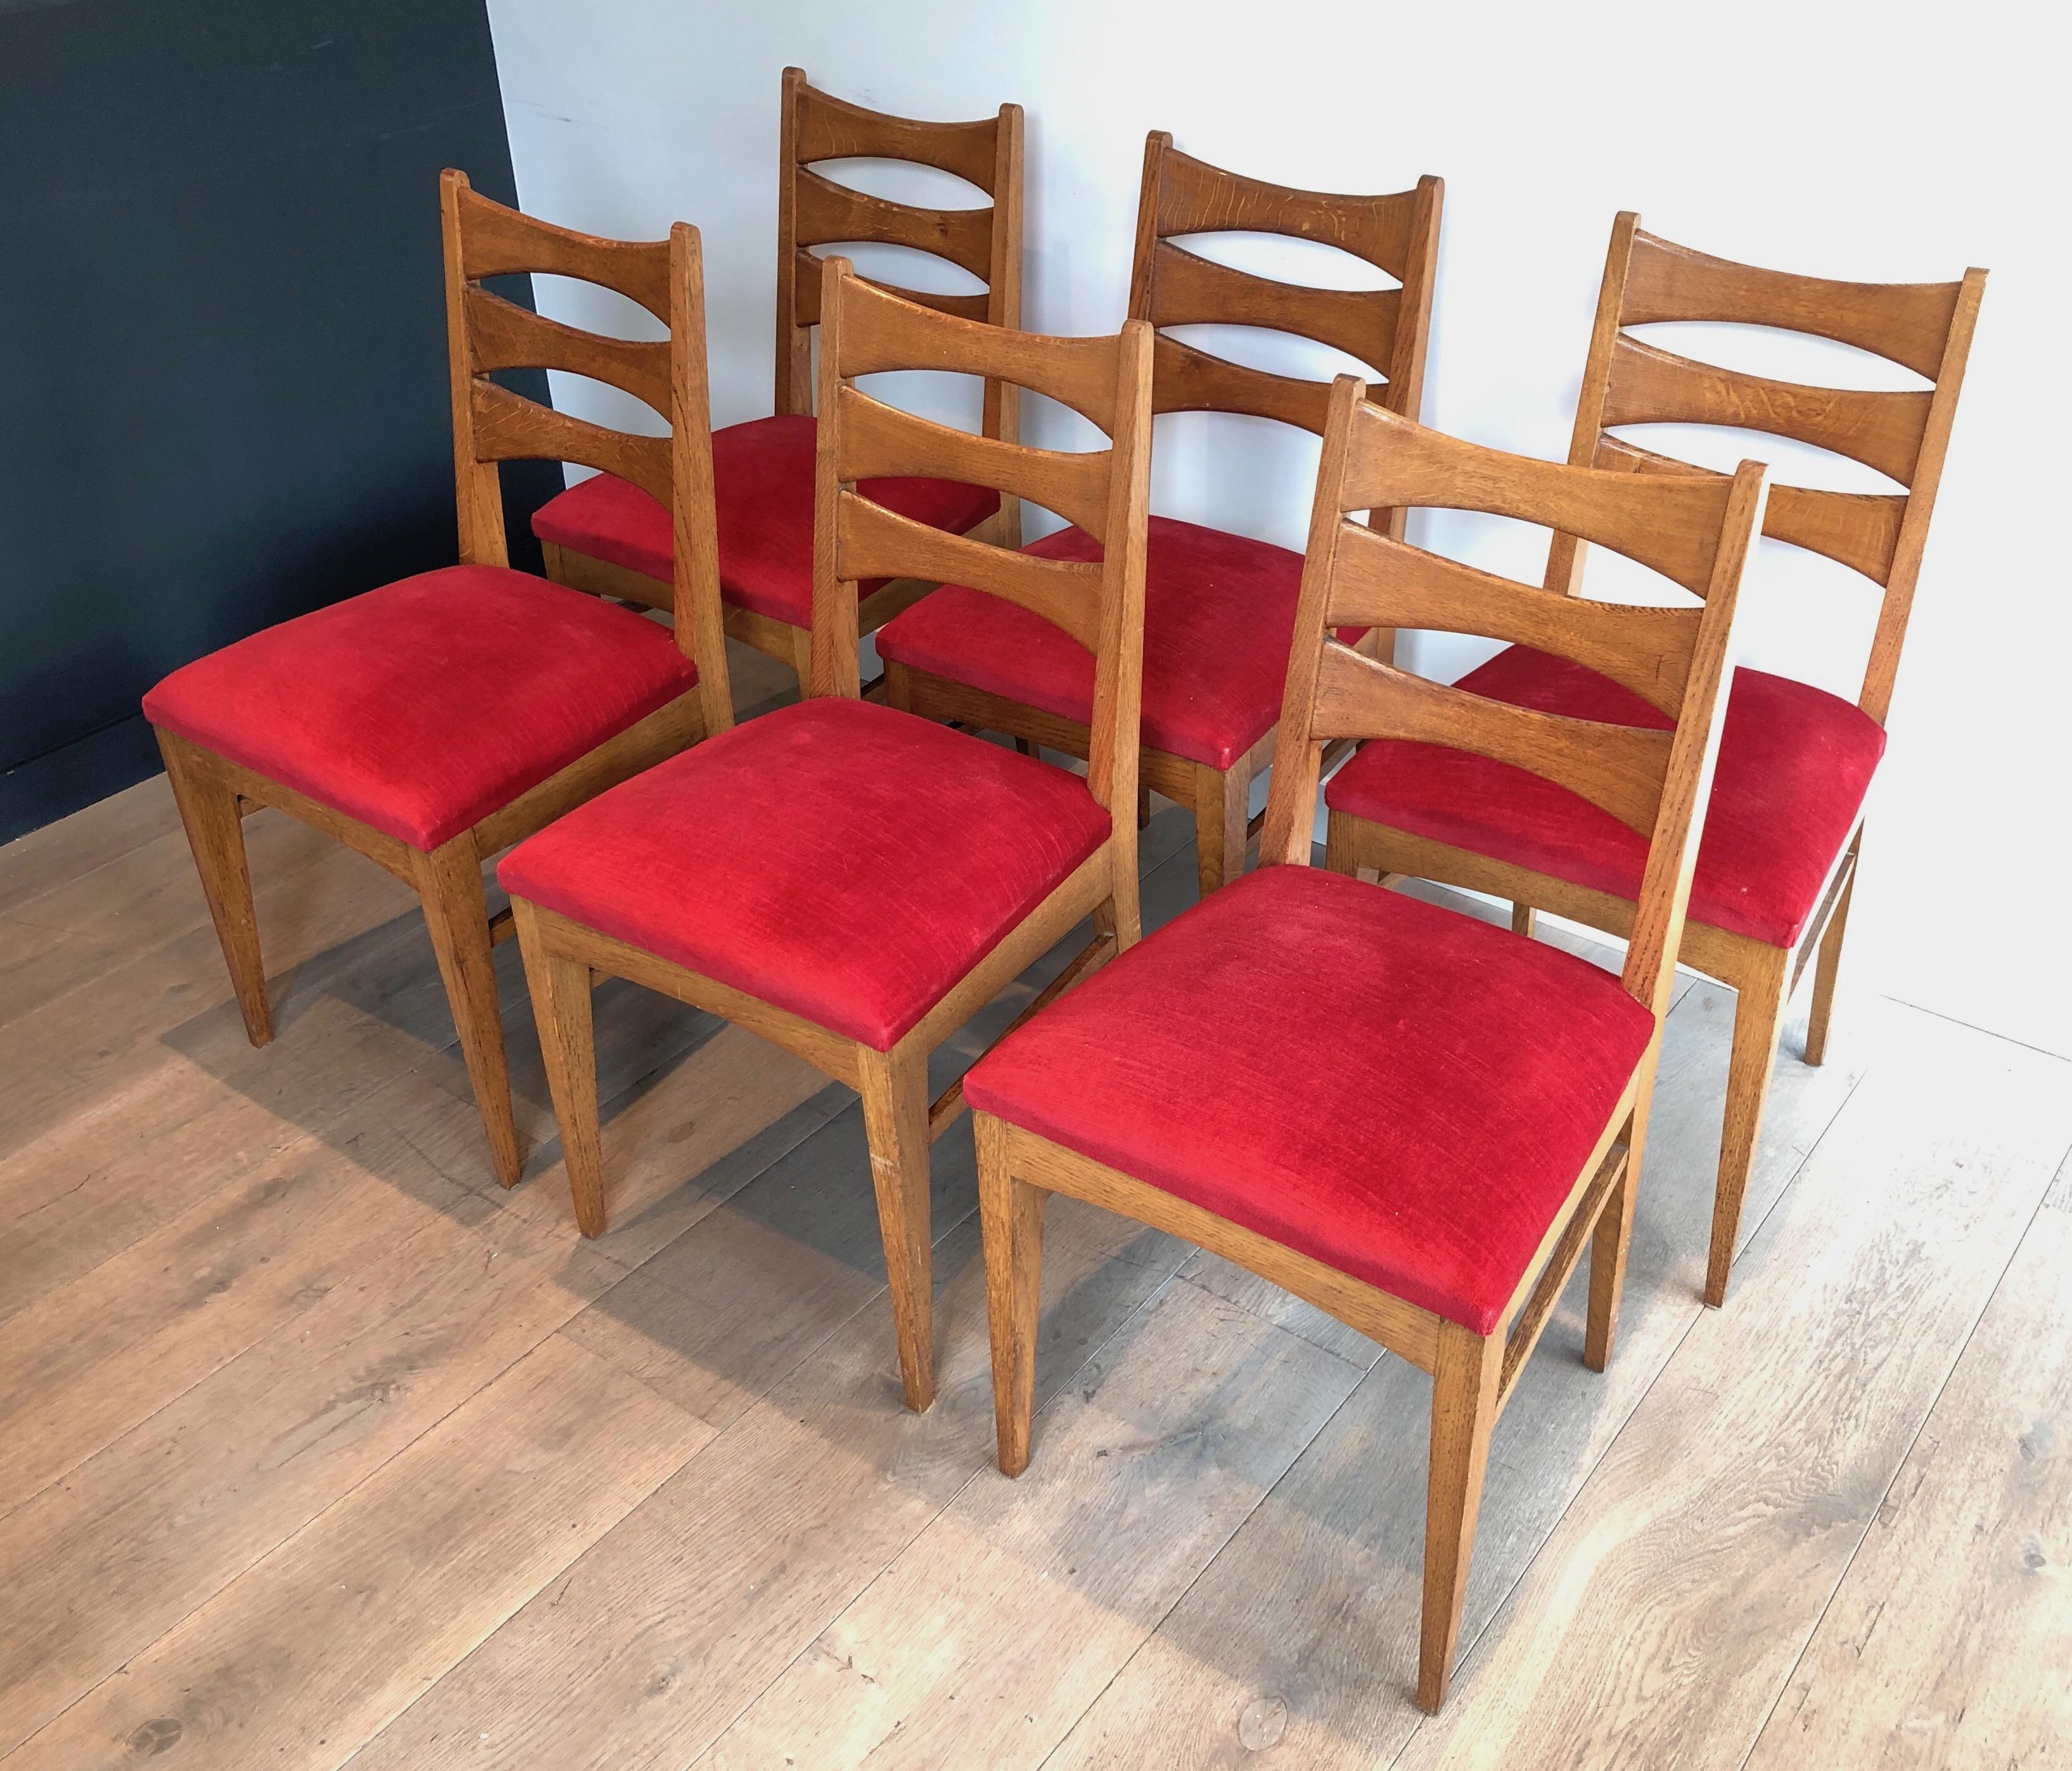 This very nice set of 6 chairs is made of oak with red velvet seats. The design is very interesting and typical from 1950's French Work. Circa 1950.